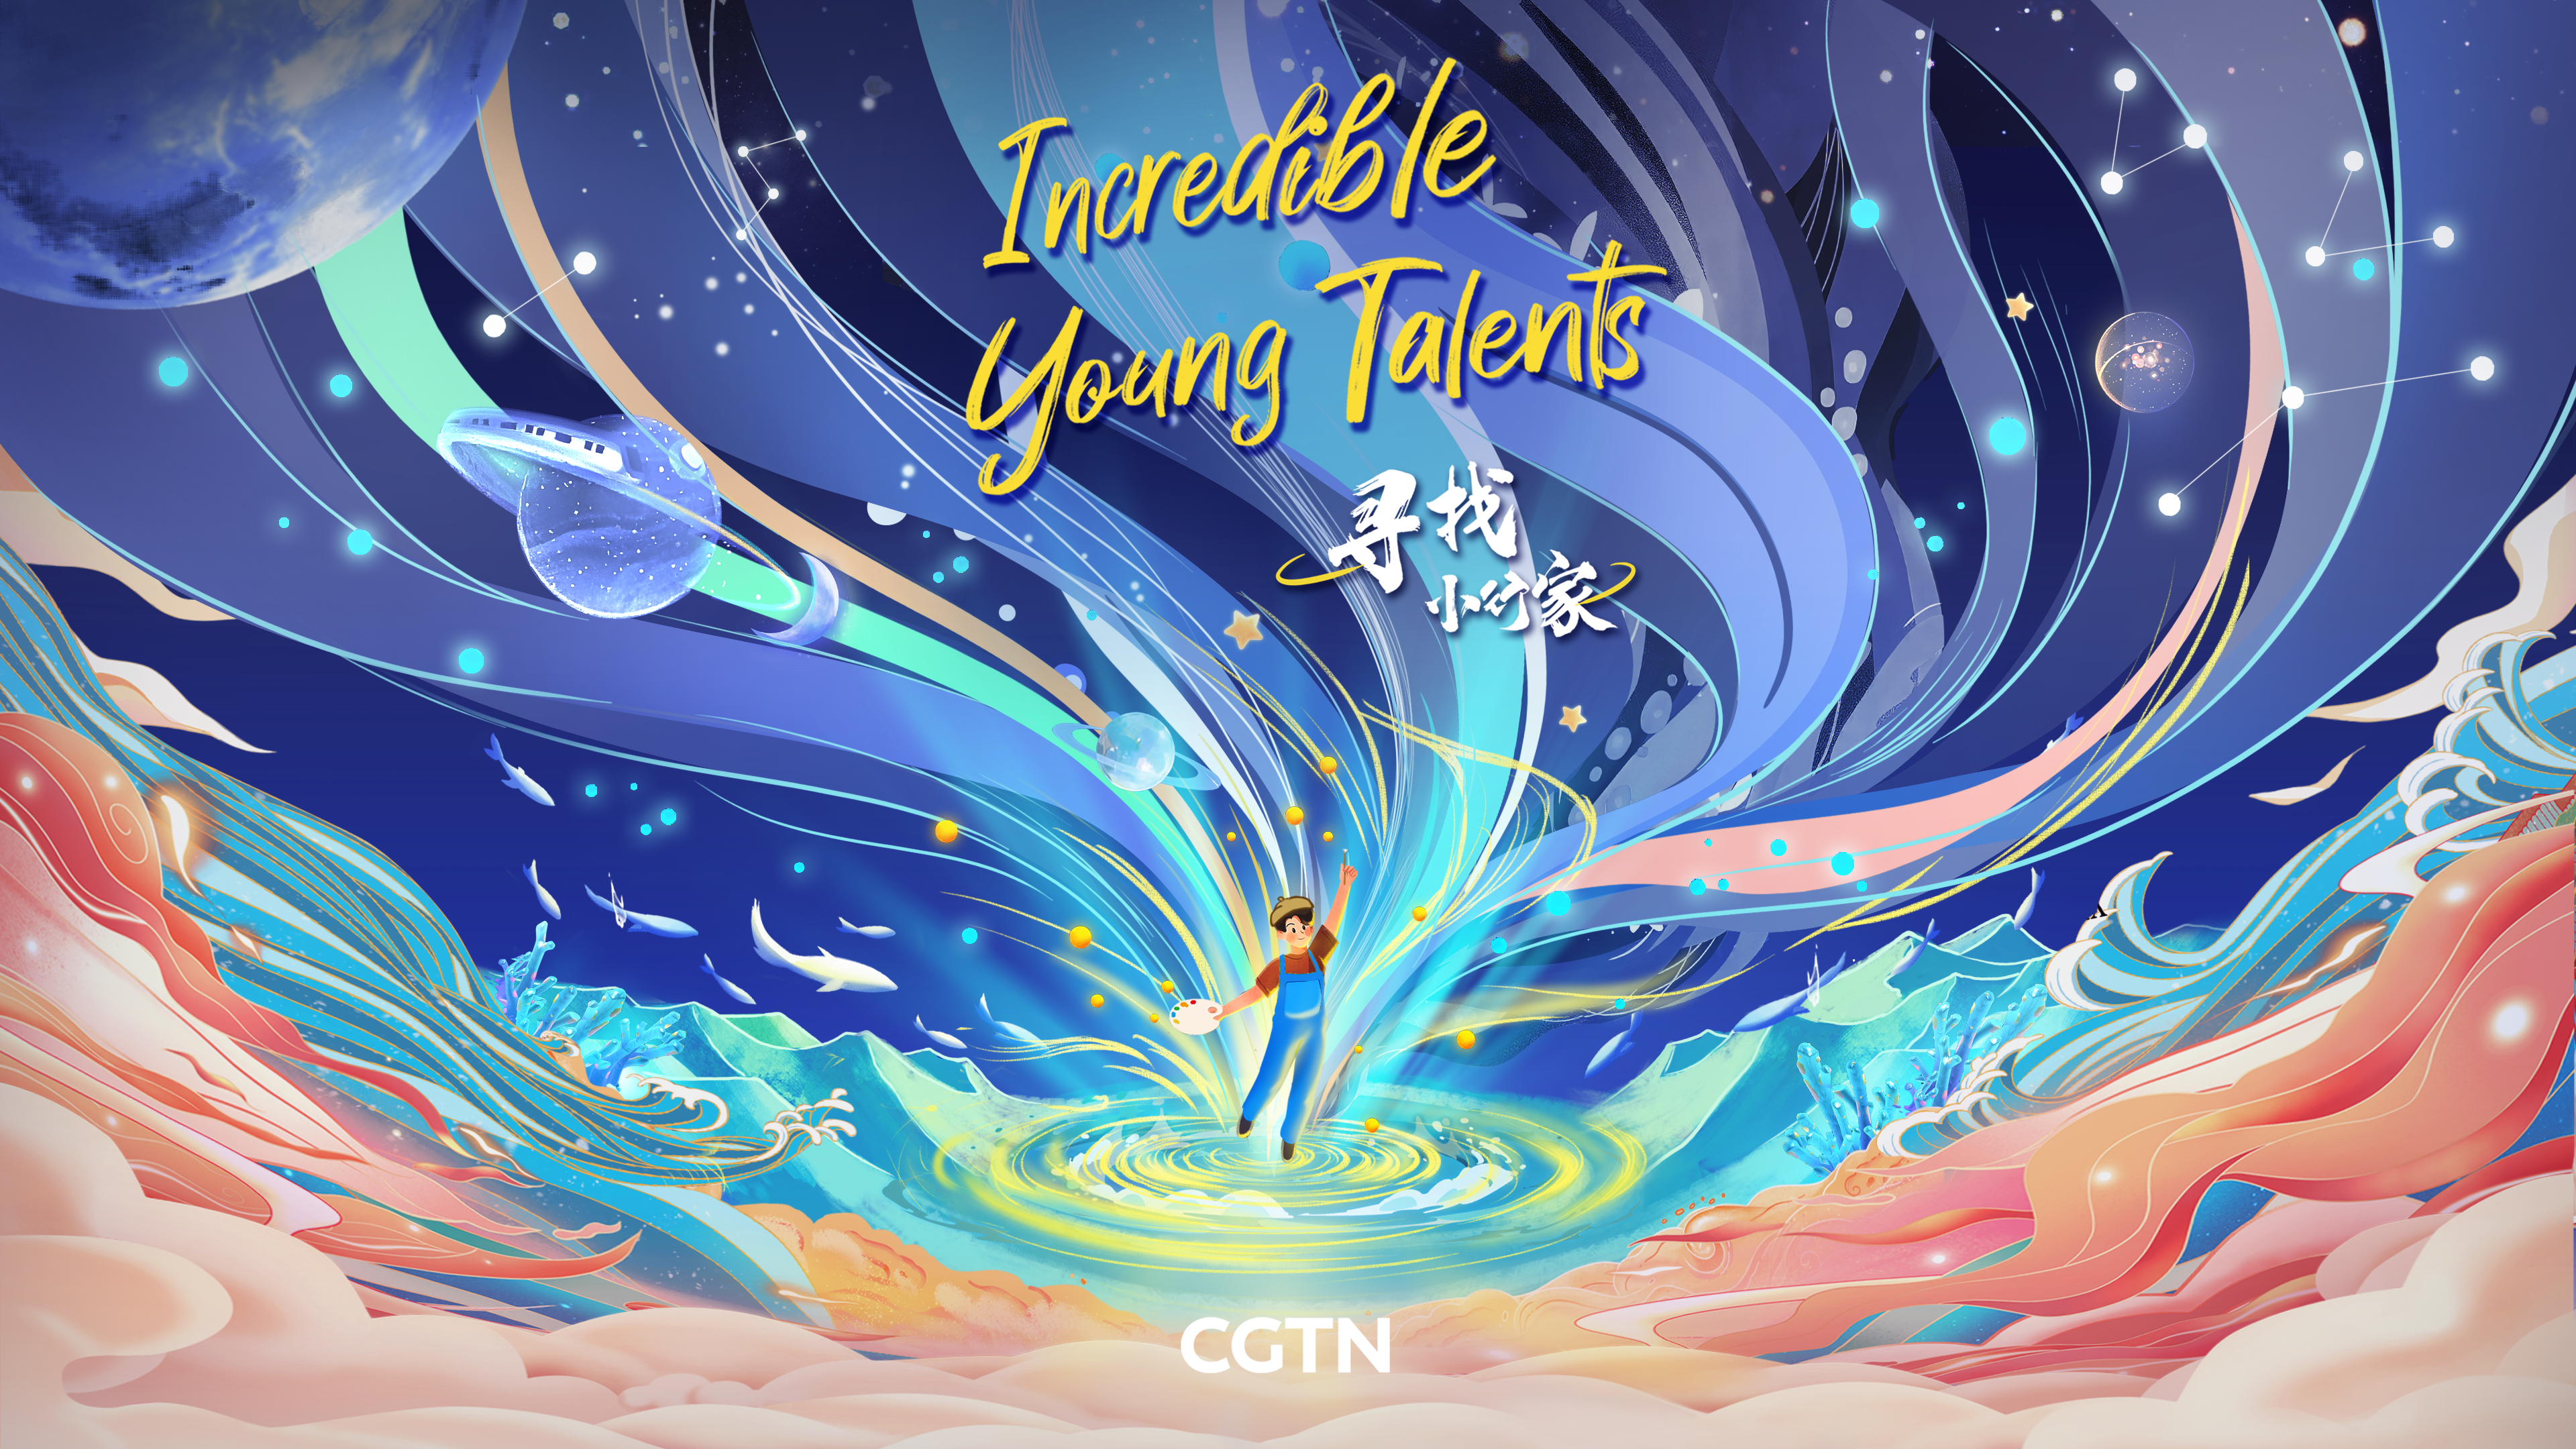 CGTN's 'Incredible Young Talents' second season in production